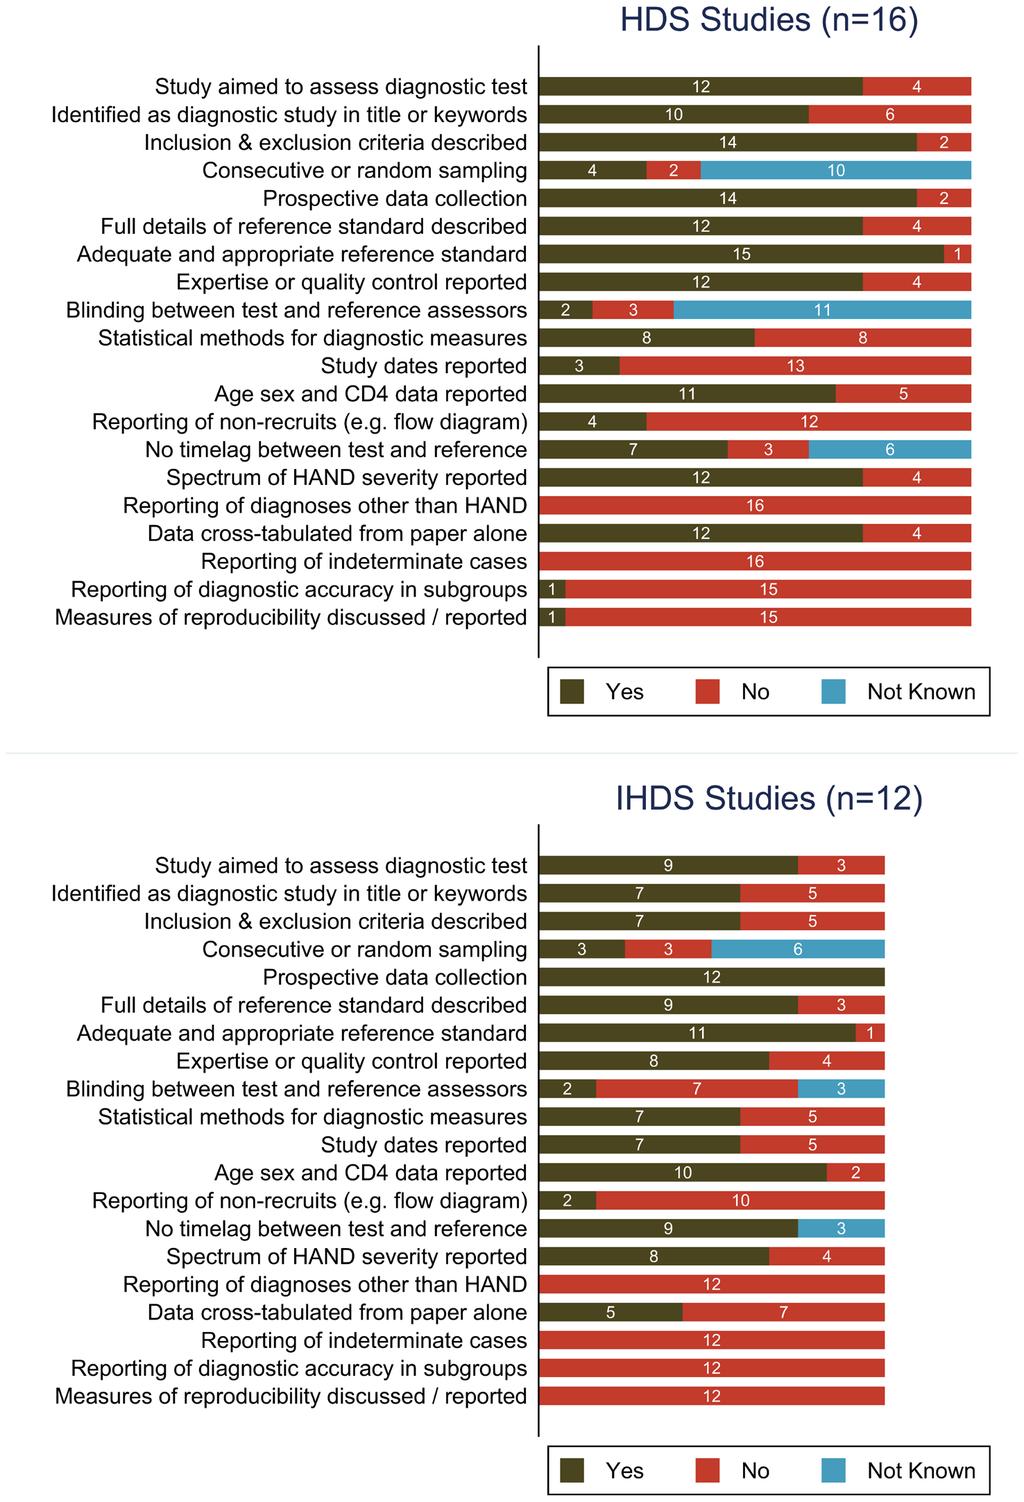 Figure 2. Methodology and reporting of reviewed studies: A, the HIV Dementia Scale; B, International HIV Dementia Scale.